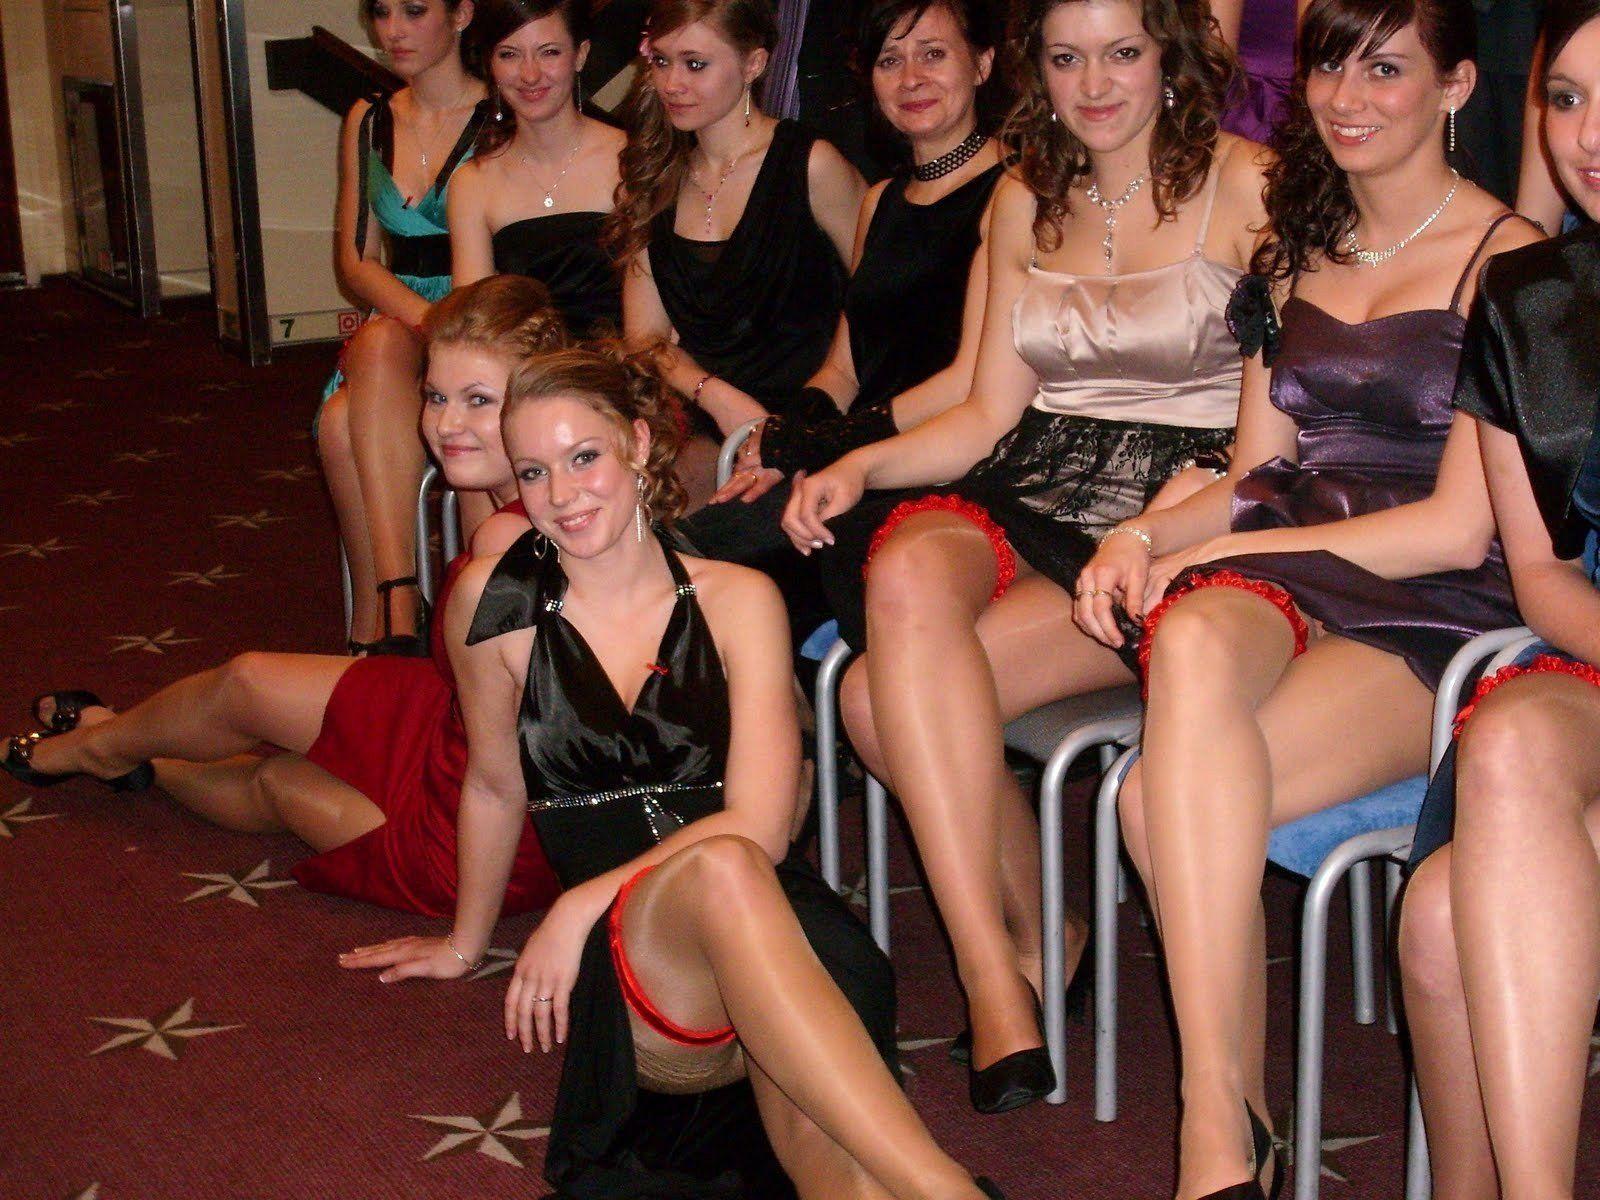 Flea F. reccomend upskirt pantyhose at weddings and parties